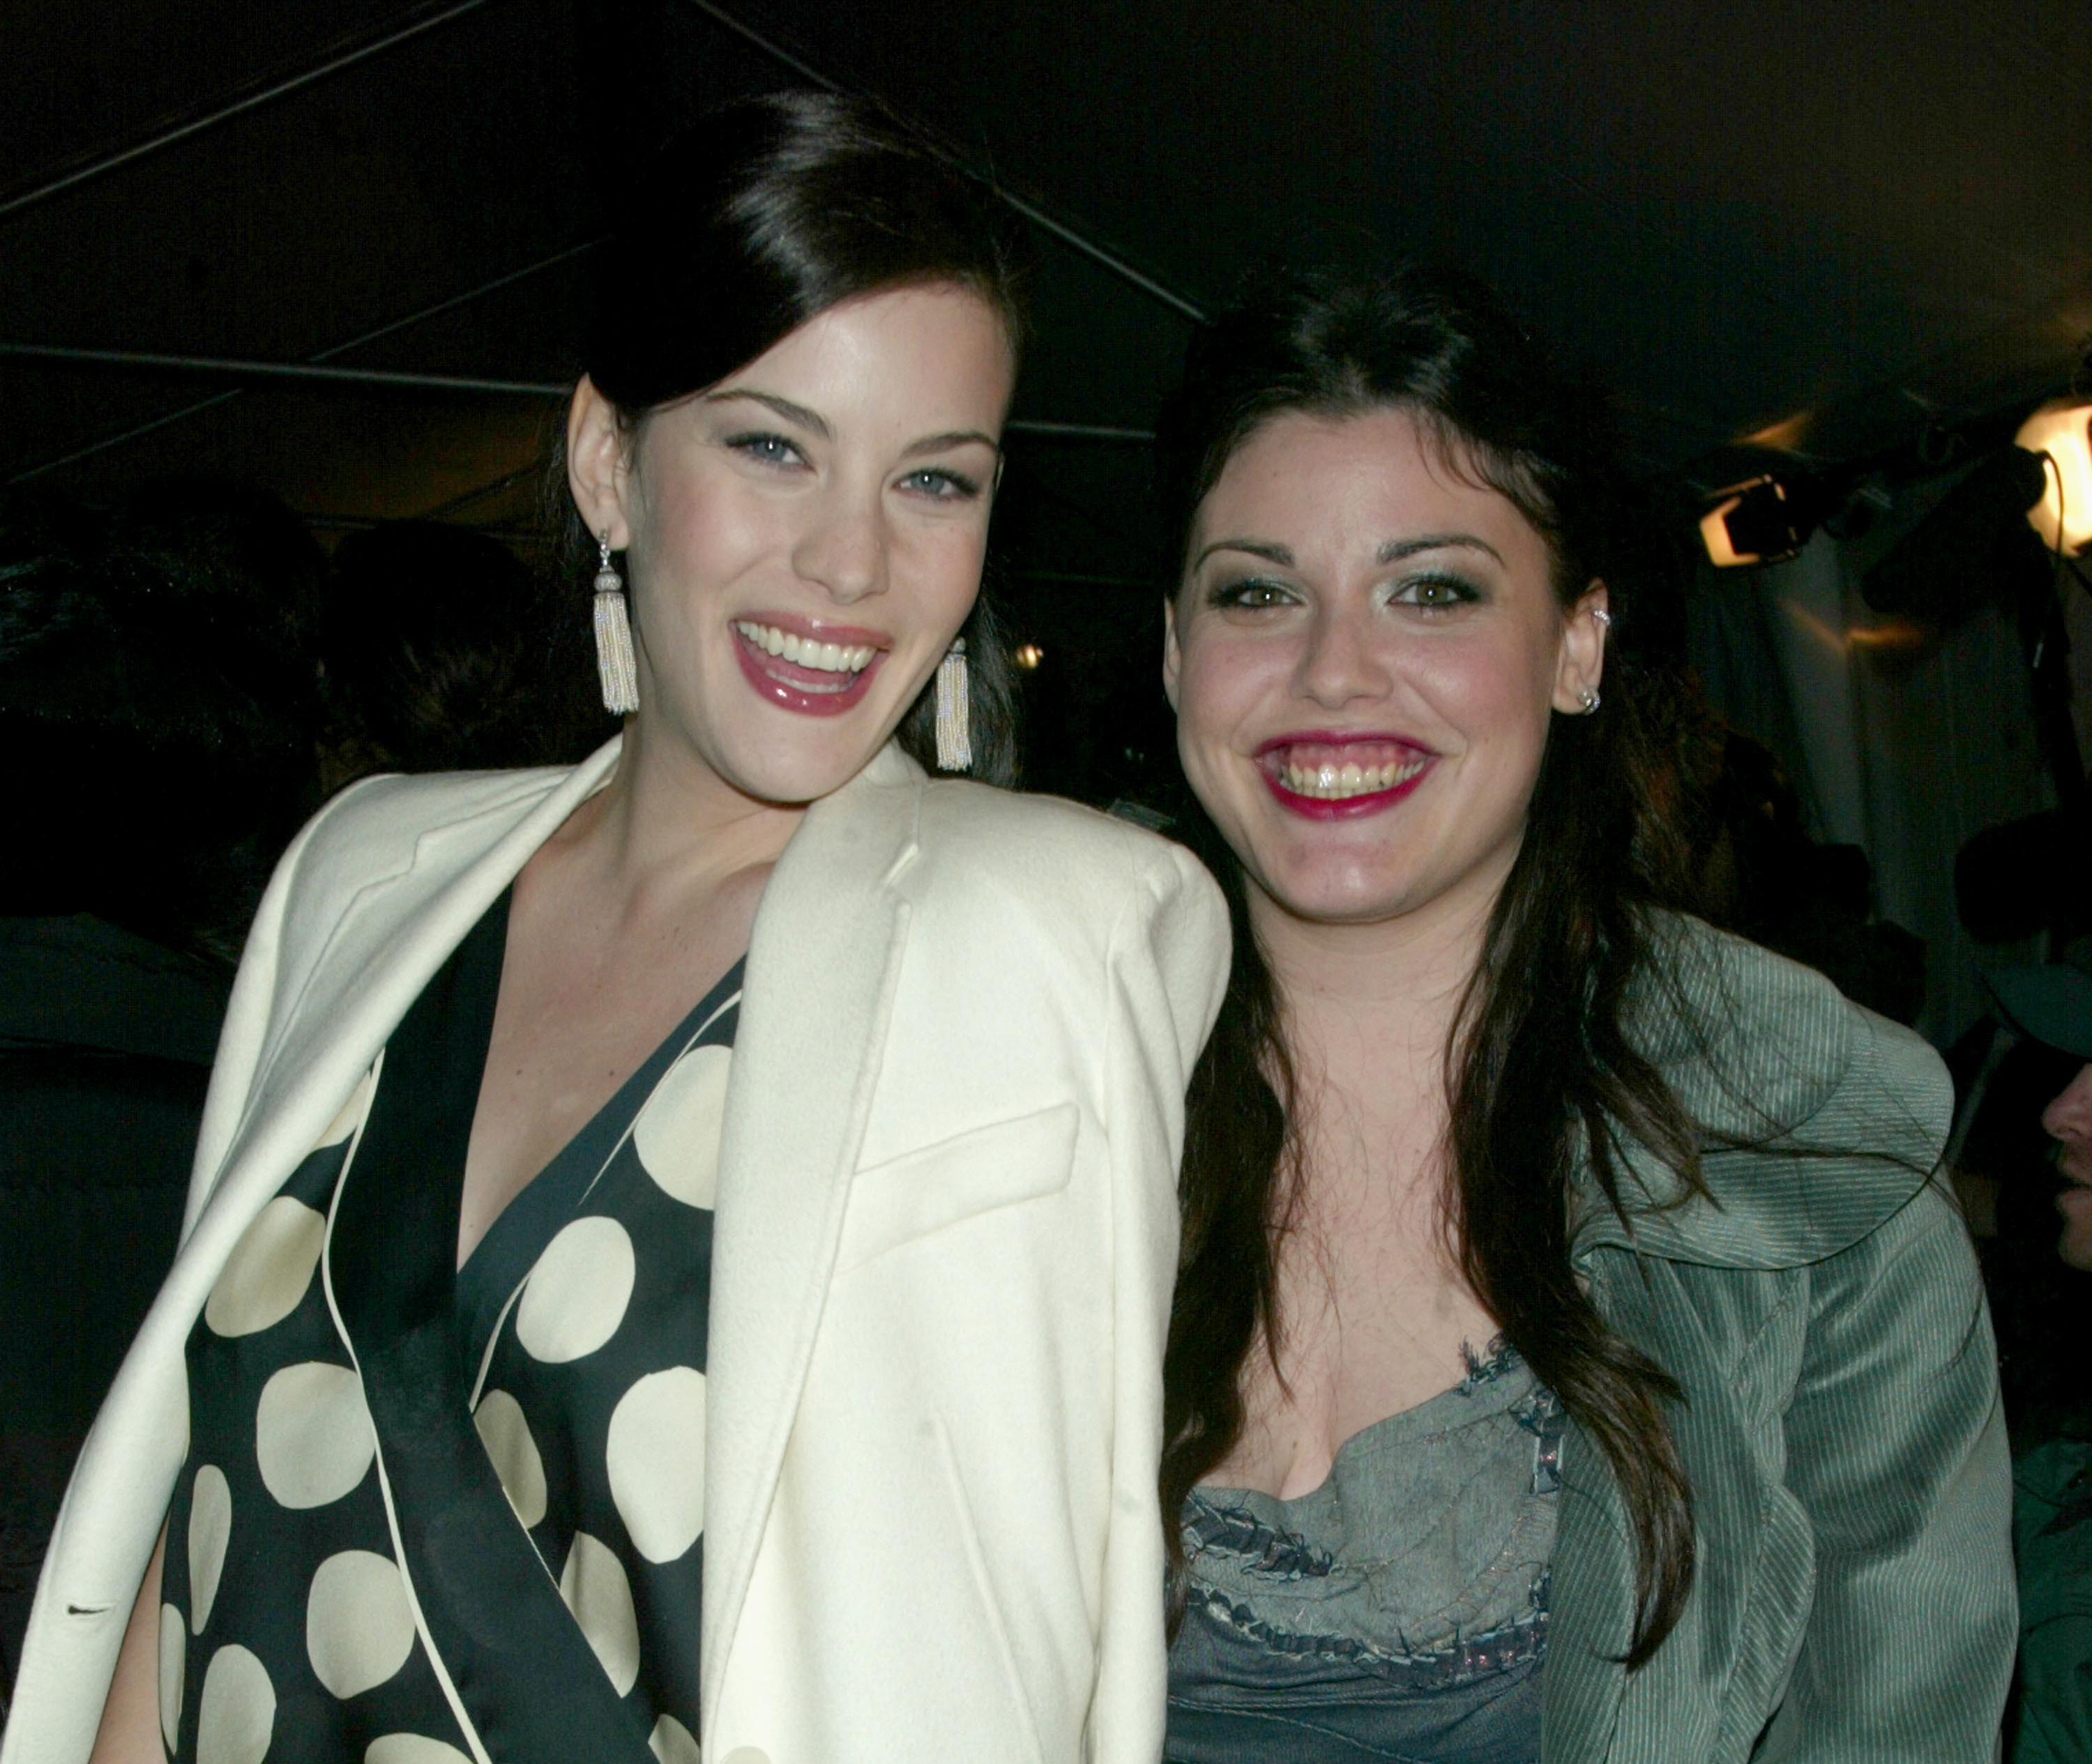 Liv Tyler & Mia Tyler at Ziegfeld Theatre in New York, United States on December 05, 2002. | Source: Getty Images